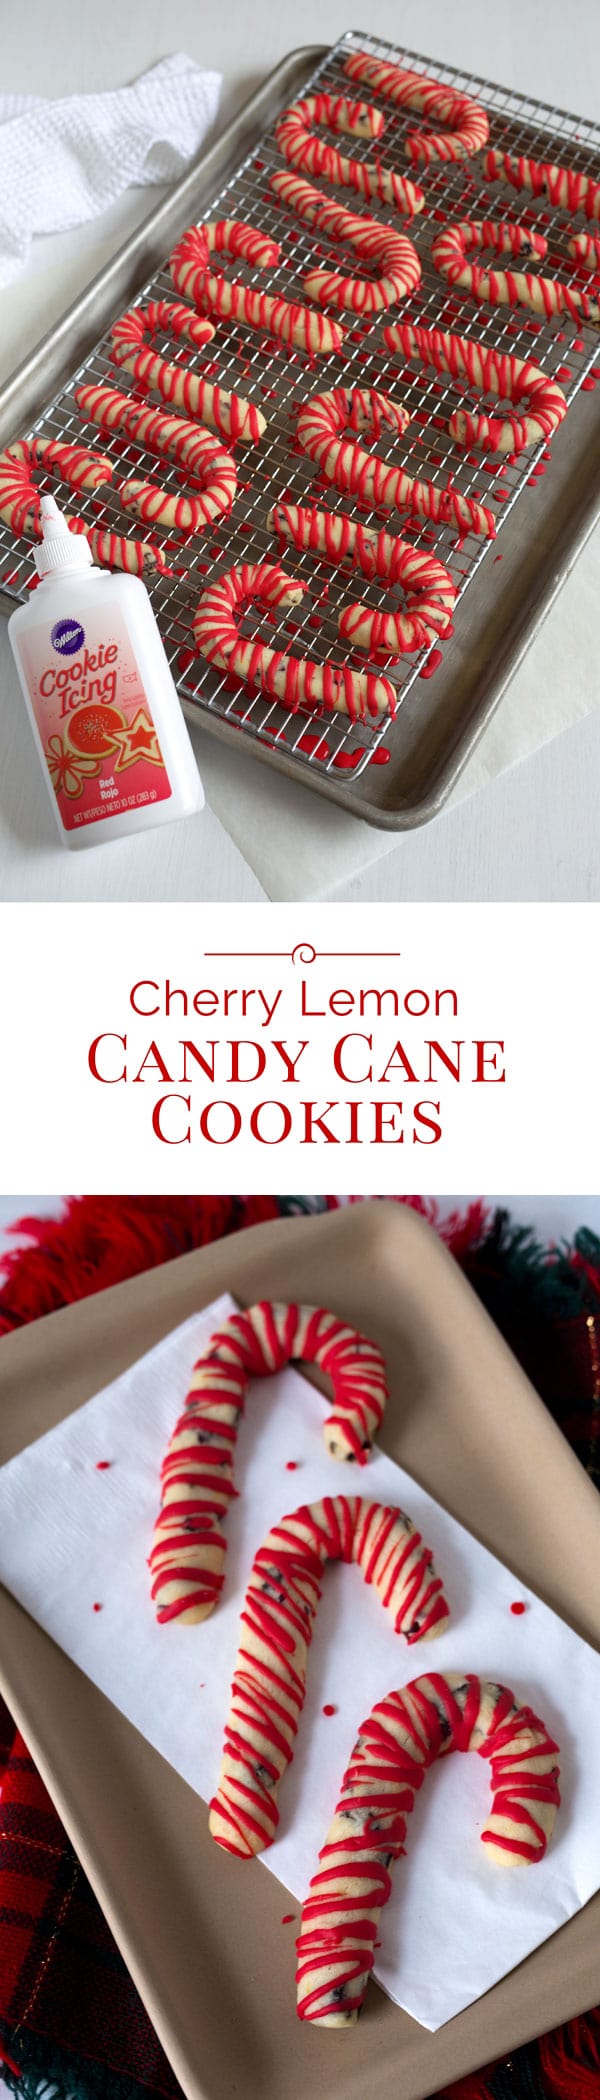 Cherry-Lemon-Candy-Cane-Cookies-Collage-2-Barbara-Bakes